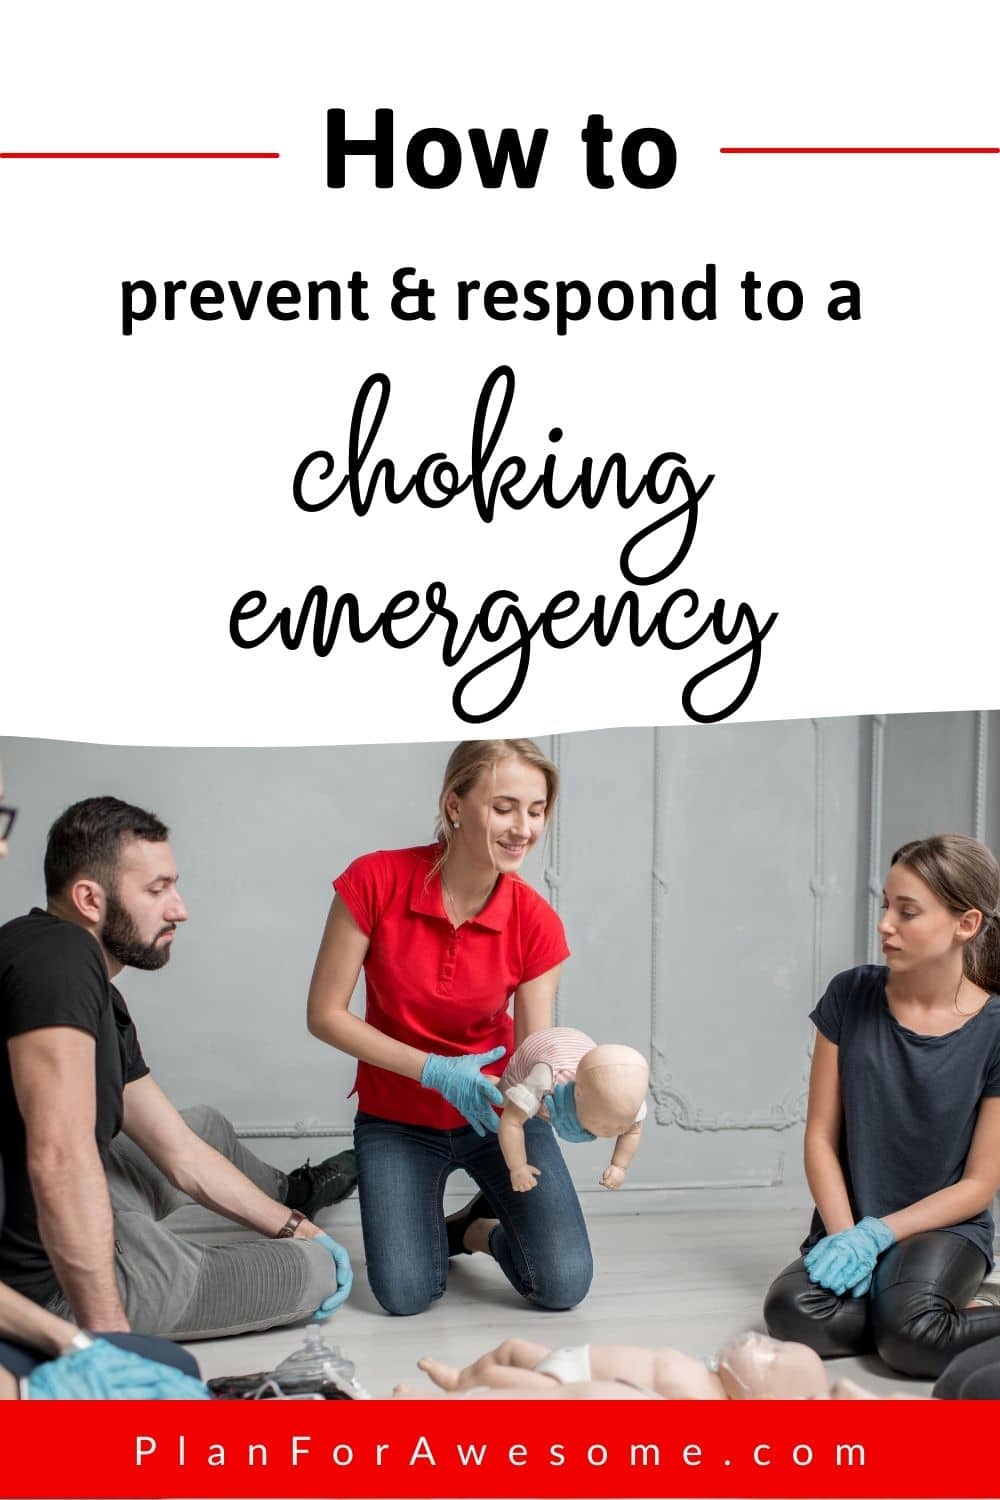 1 great choking prevention resource you should know about